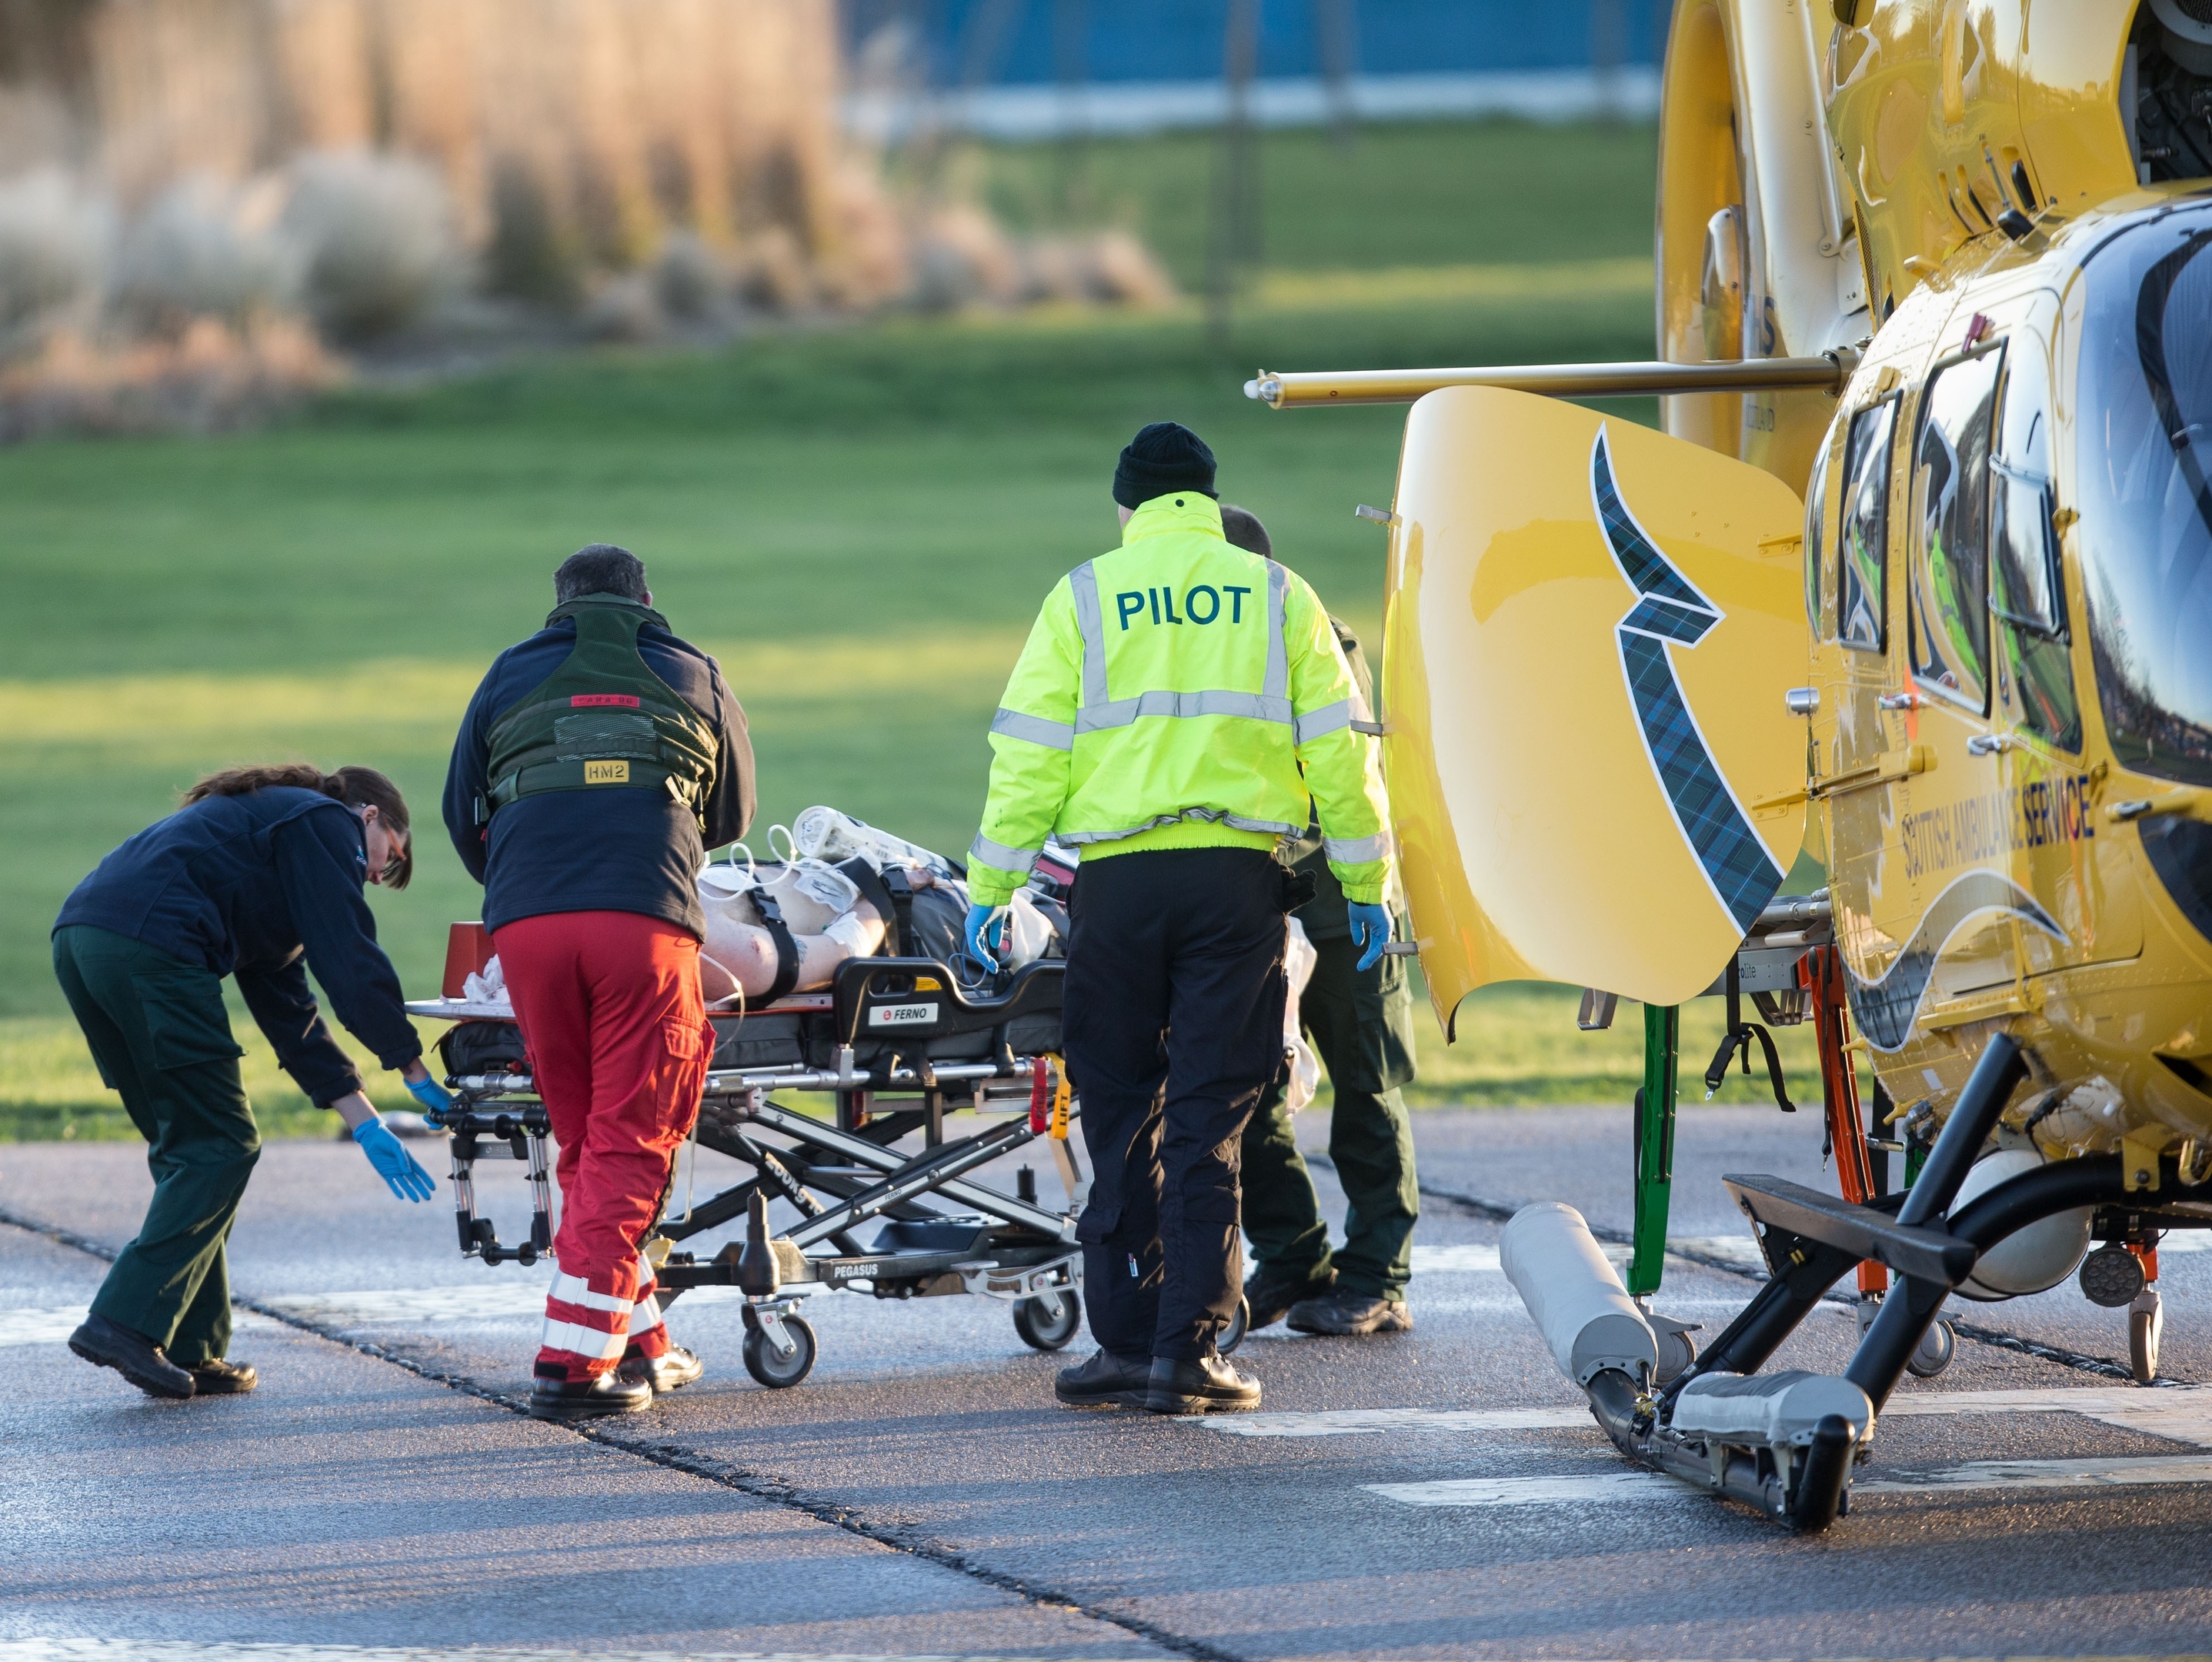 A man has been seriously injured in a car crash on the A98 in Aberdeenshire. The Fiat Punto crashed on the Macduff to New Pitsligo road at about 07:20. Pic of the man arriving at Aberdeen Royal Infirmary by Air Ambulance.